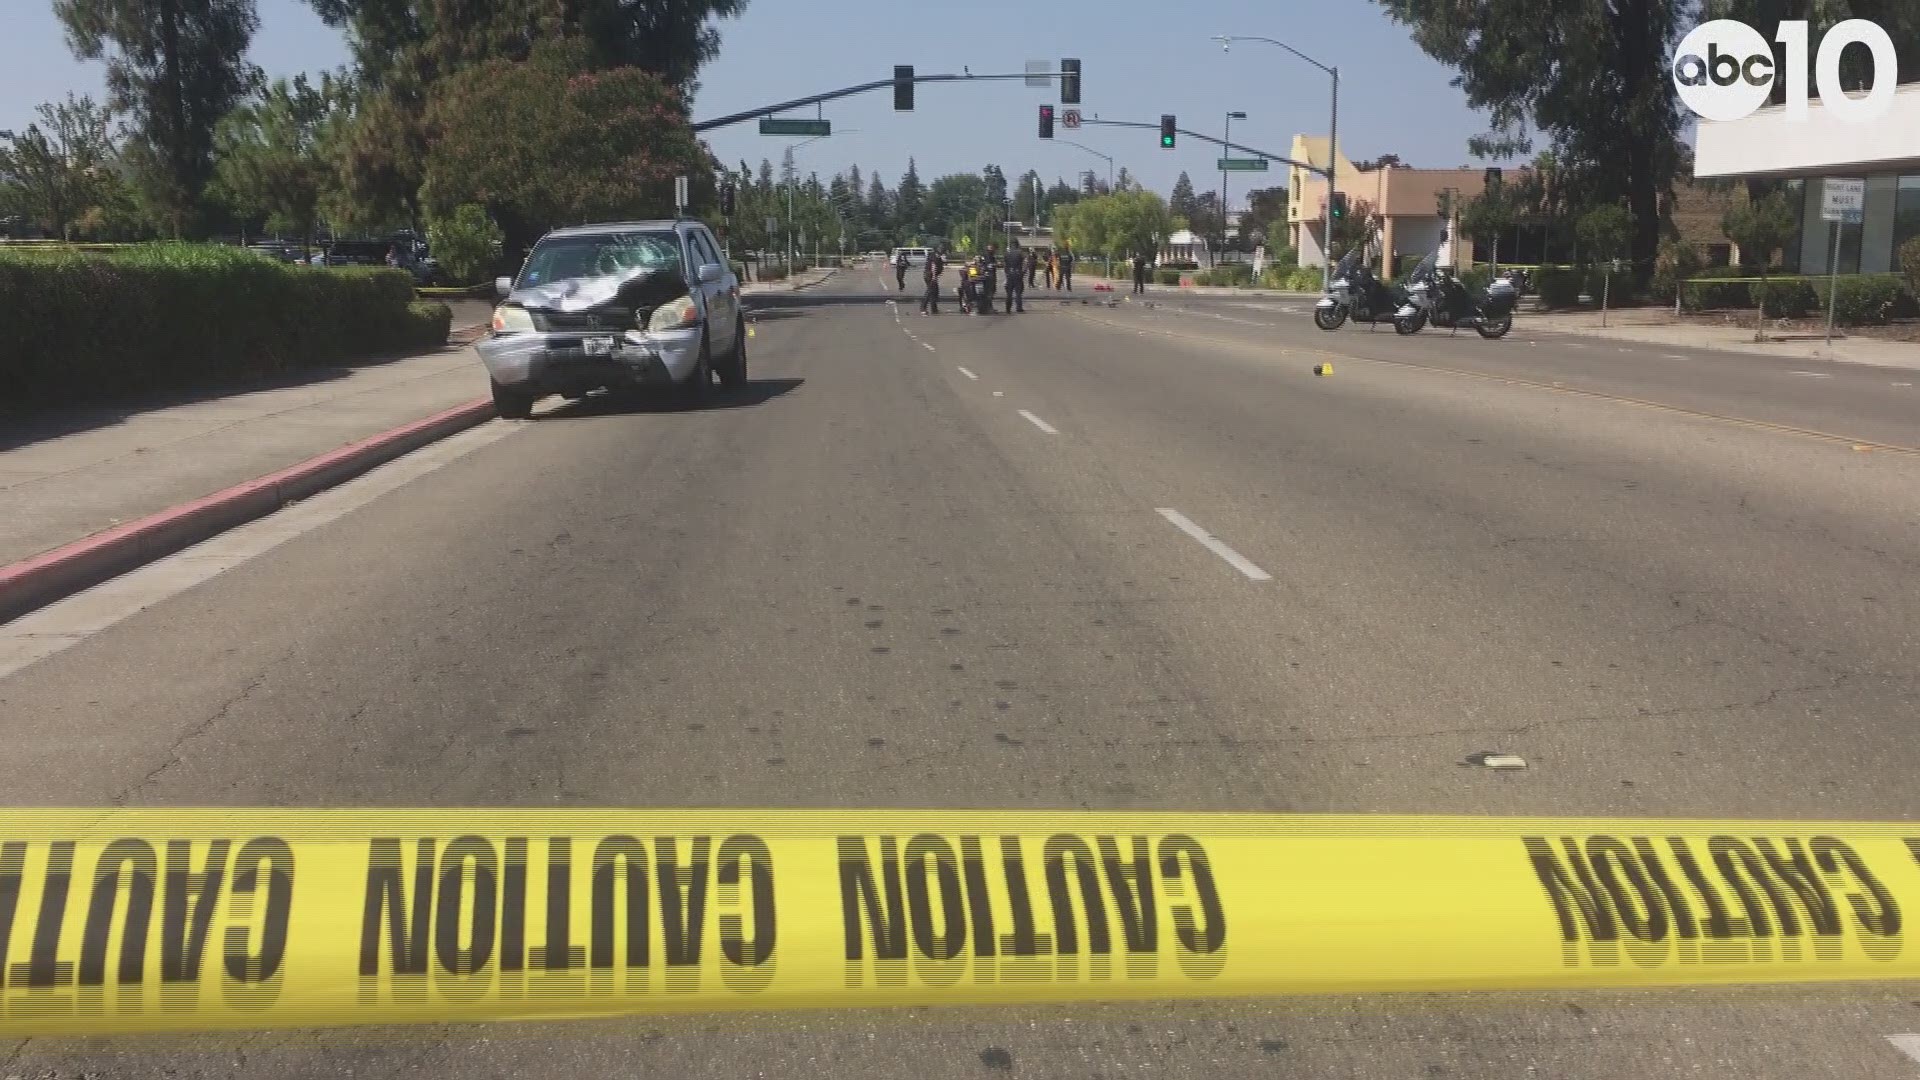 A Stockton Motorcycle Officer is in serious condition Tuesday following a two-vehicle accident, officials said.